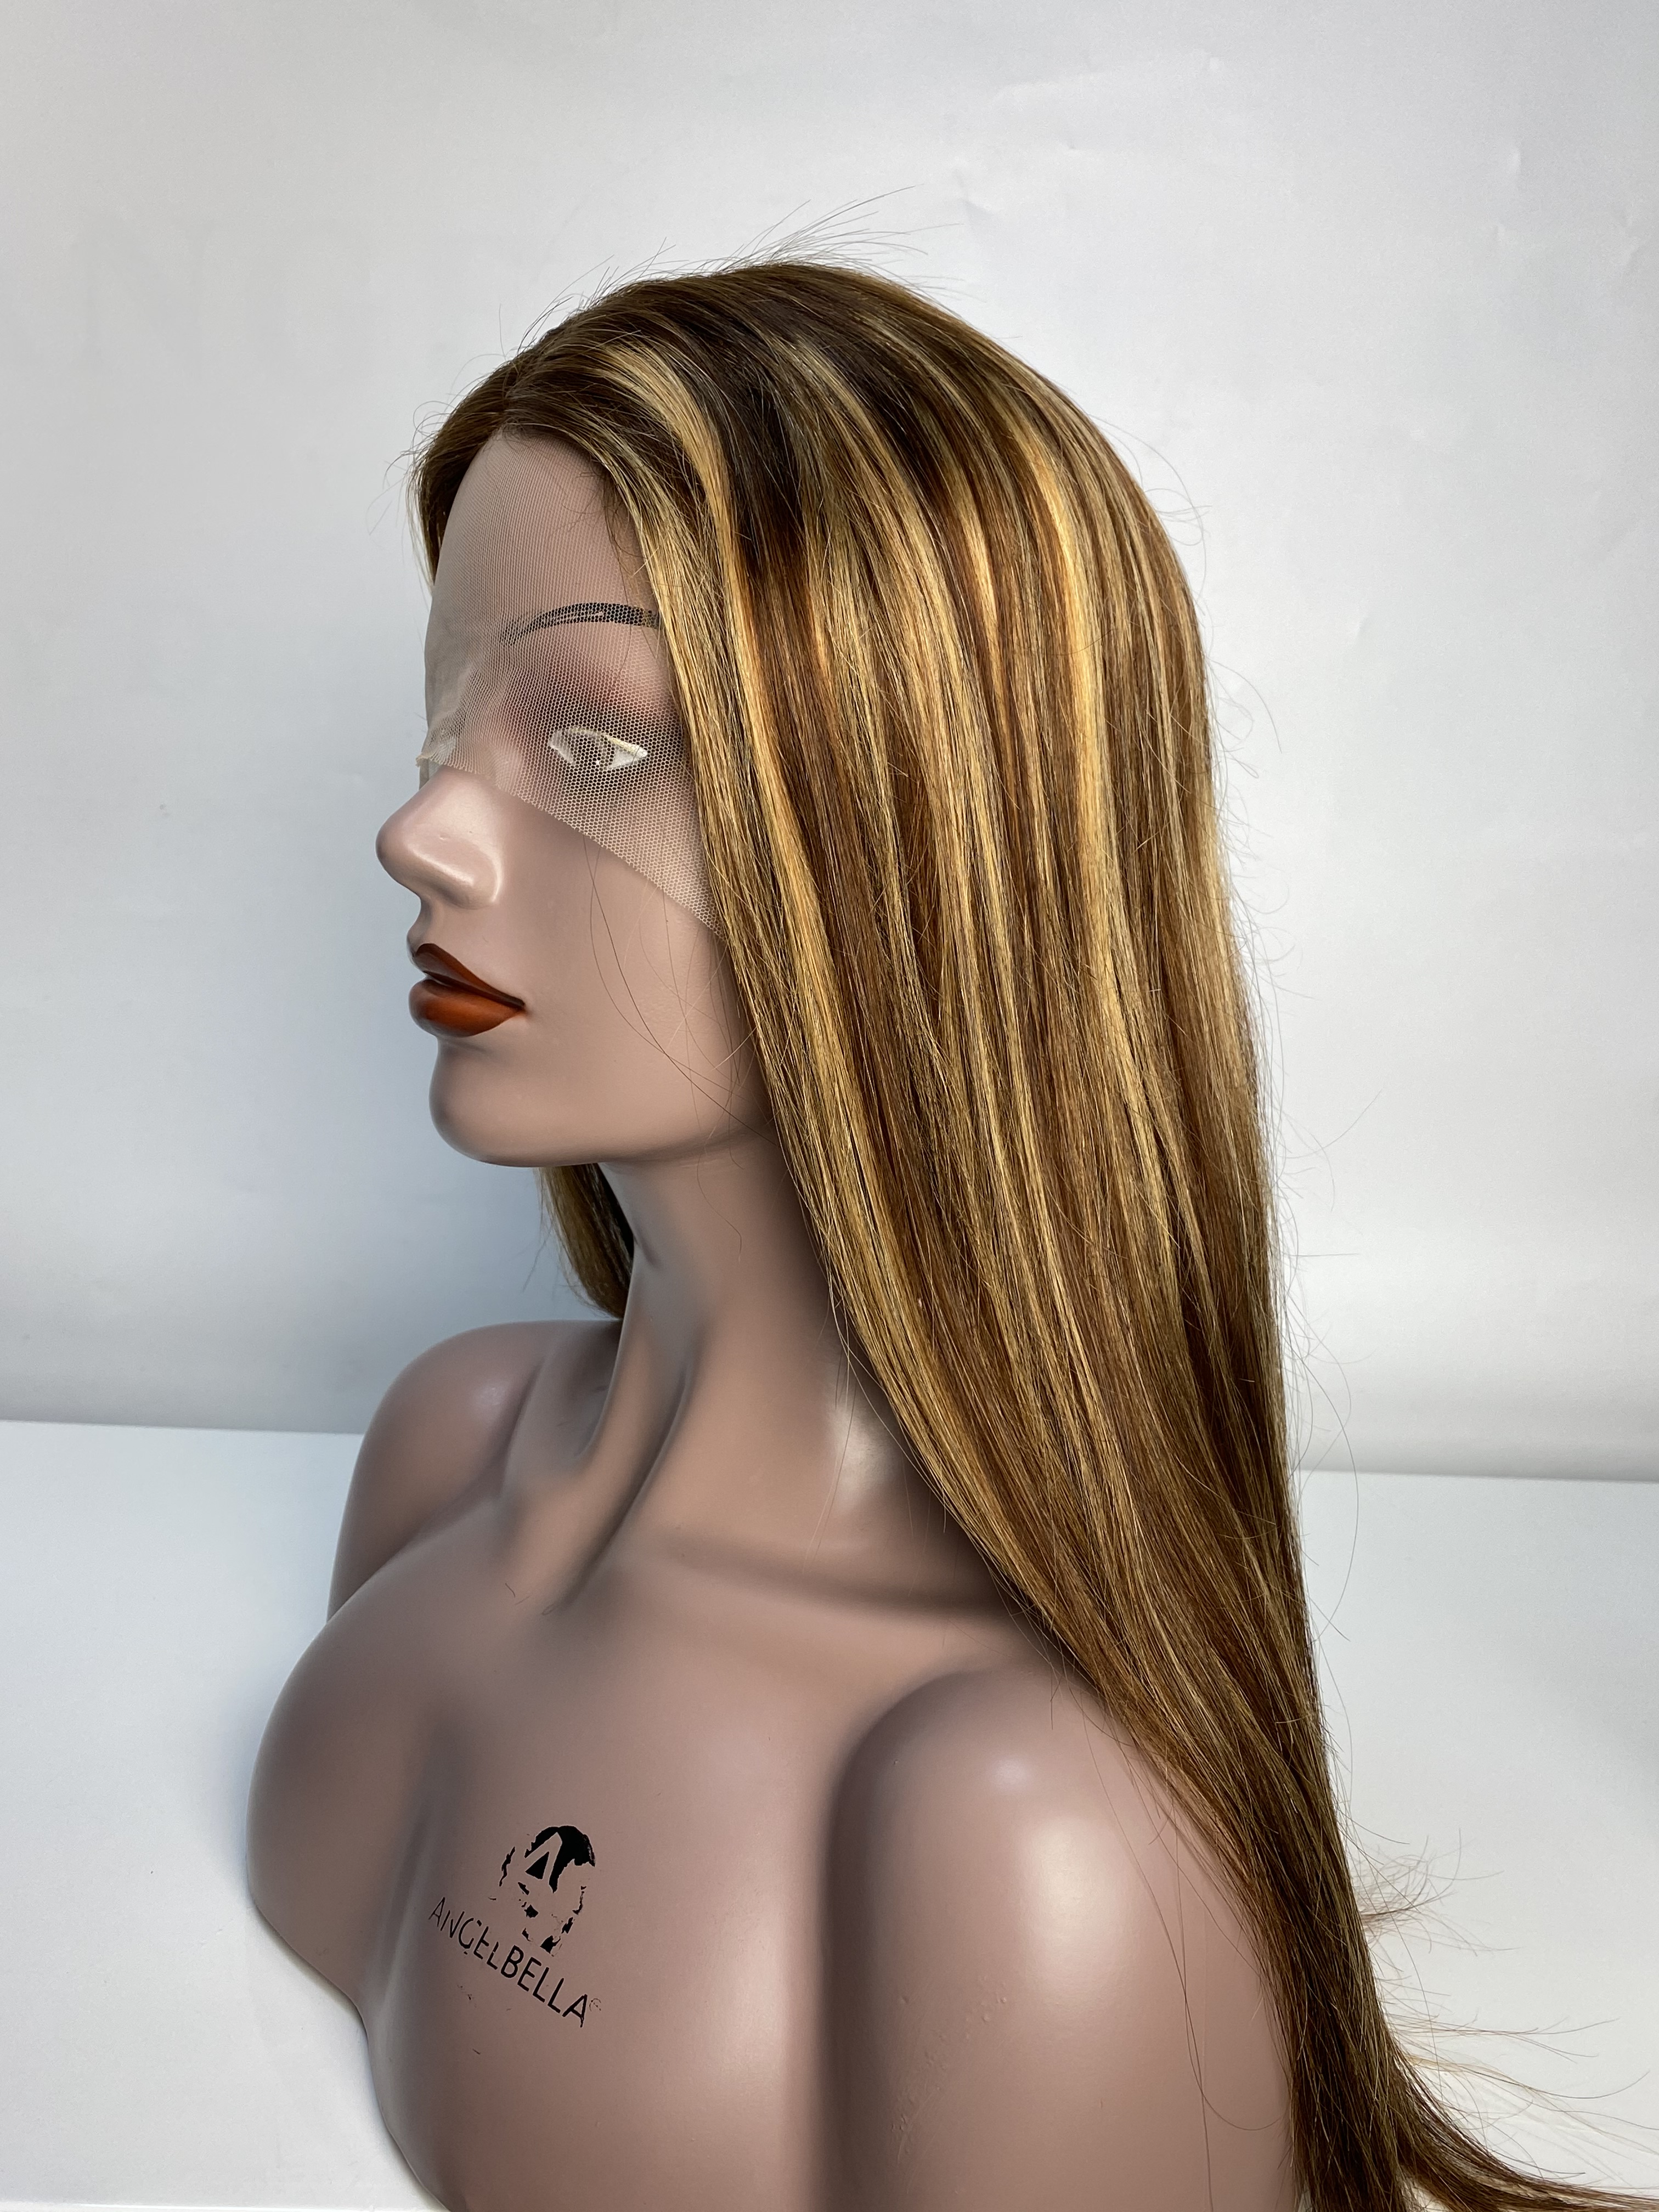 4/27# Highlight T Part Lace Front Wigs Human Hair for Black Women 